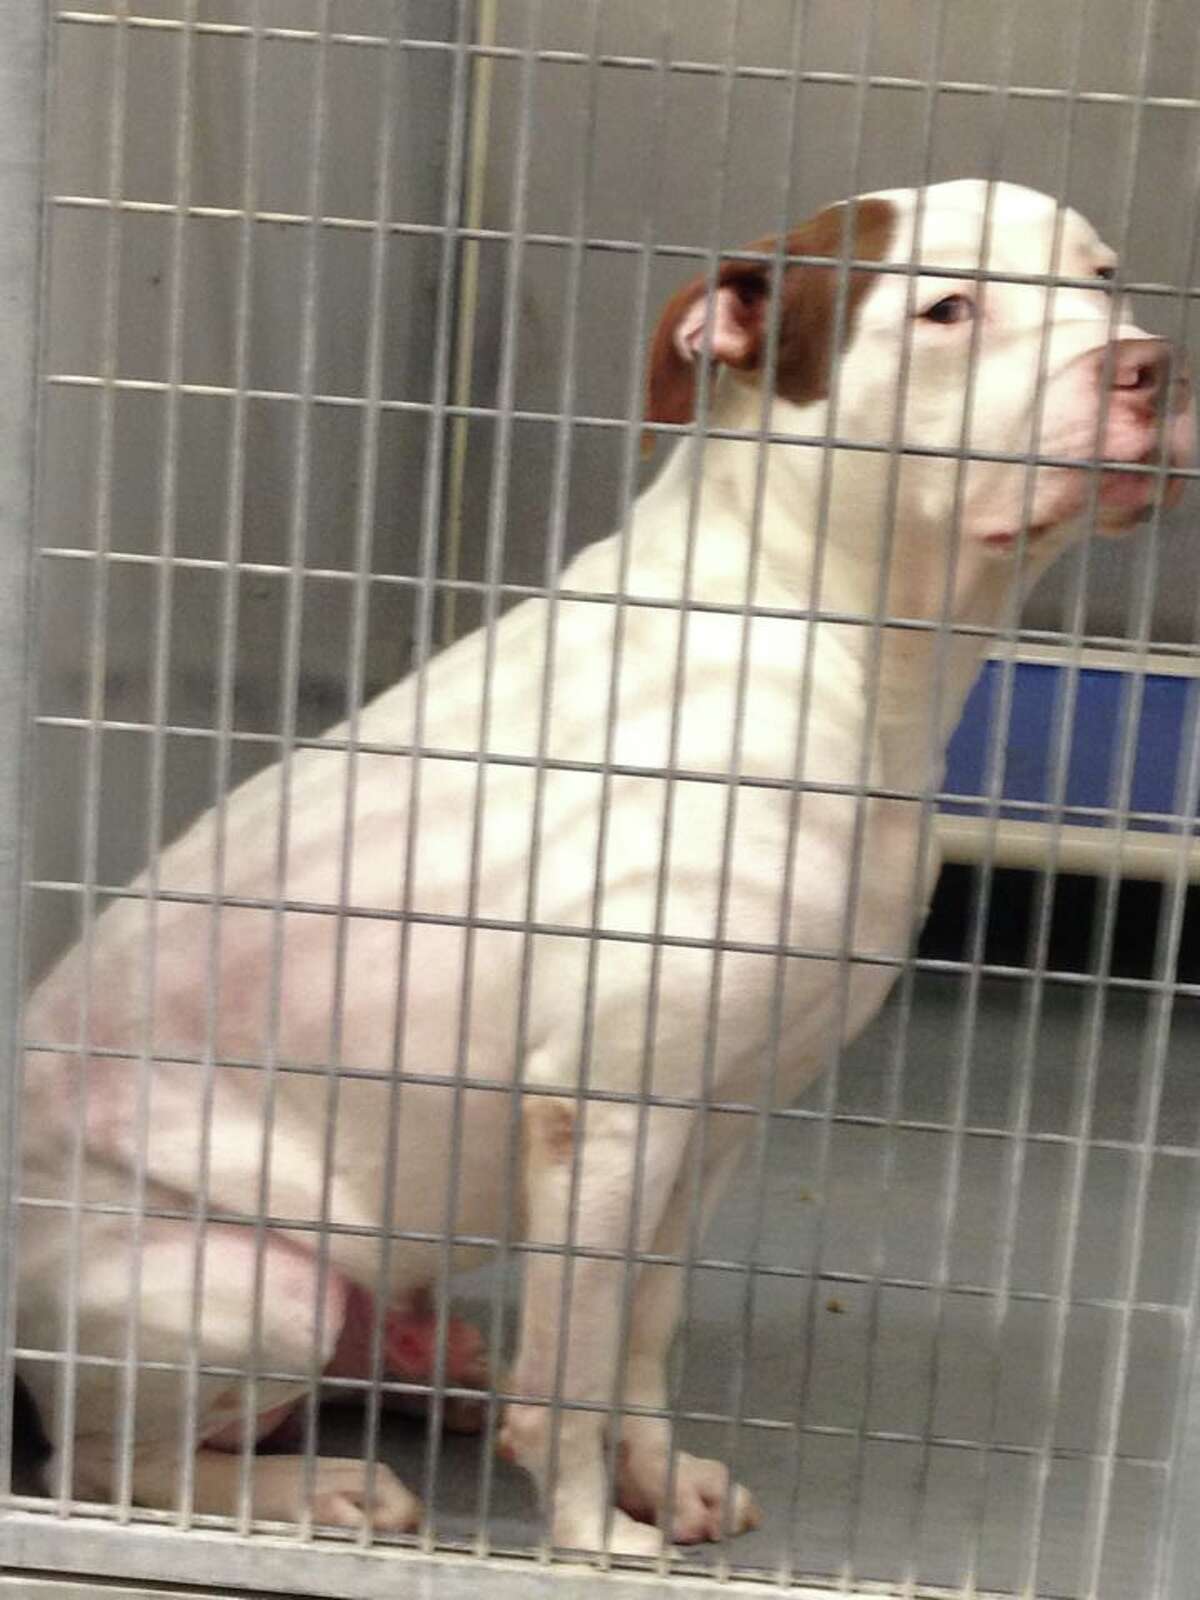 Gus has been held at Montgomery County Animal Control Shelter since the attack in February last year.